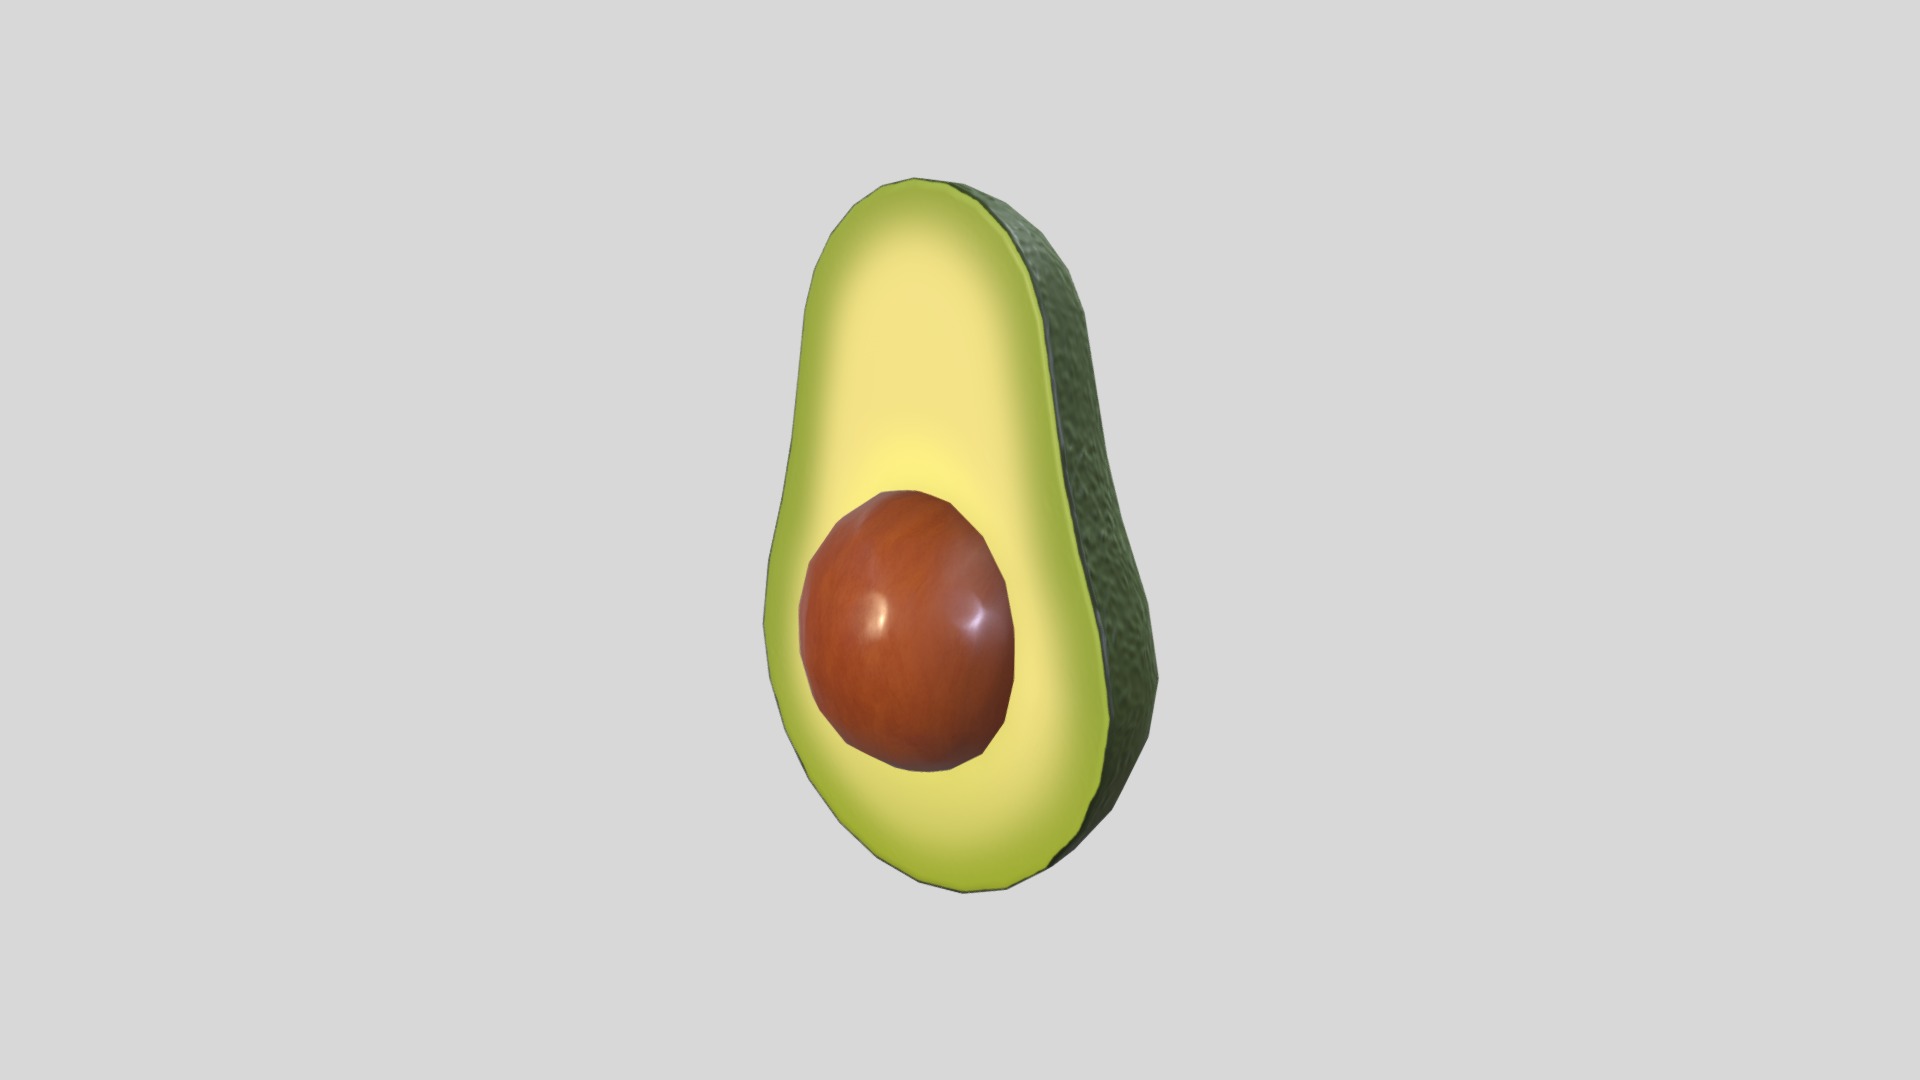 3D model Avocado - This is a 3D model of the Avocado. The 3D model is about a green and yellow avocado.